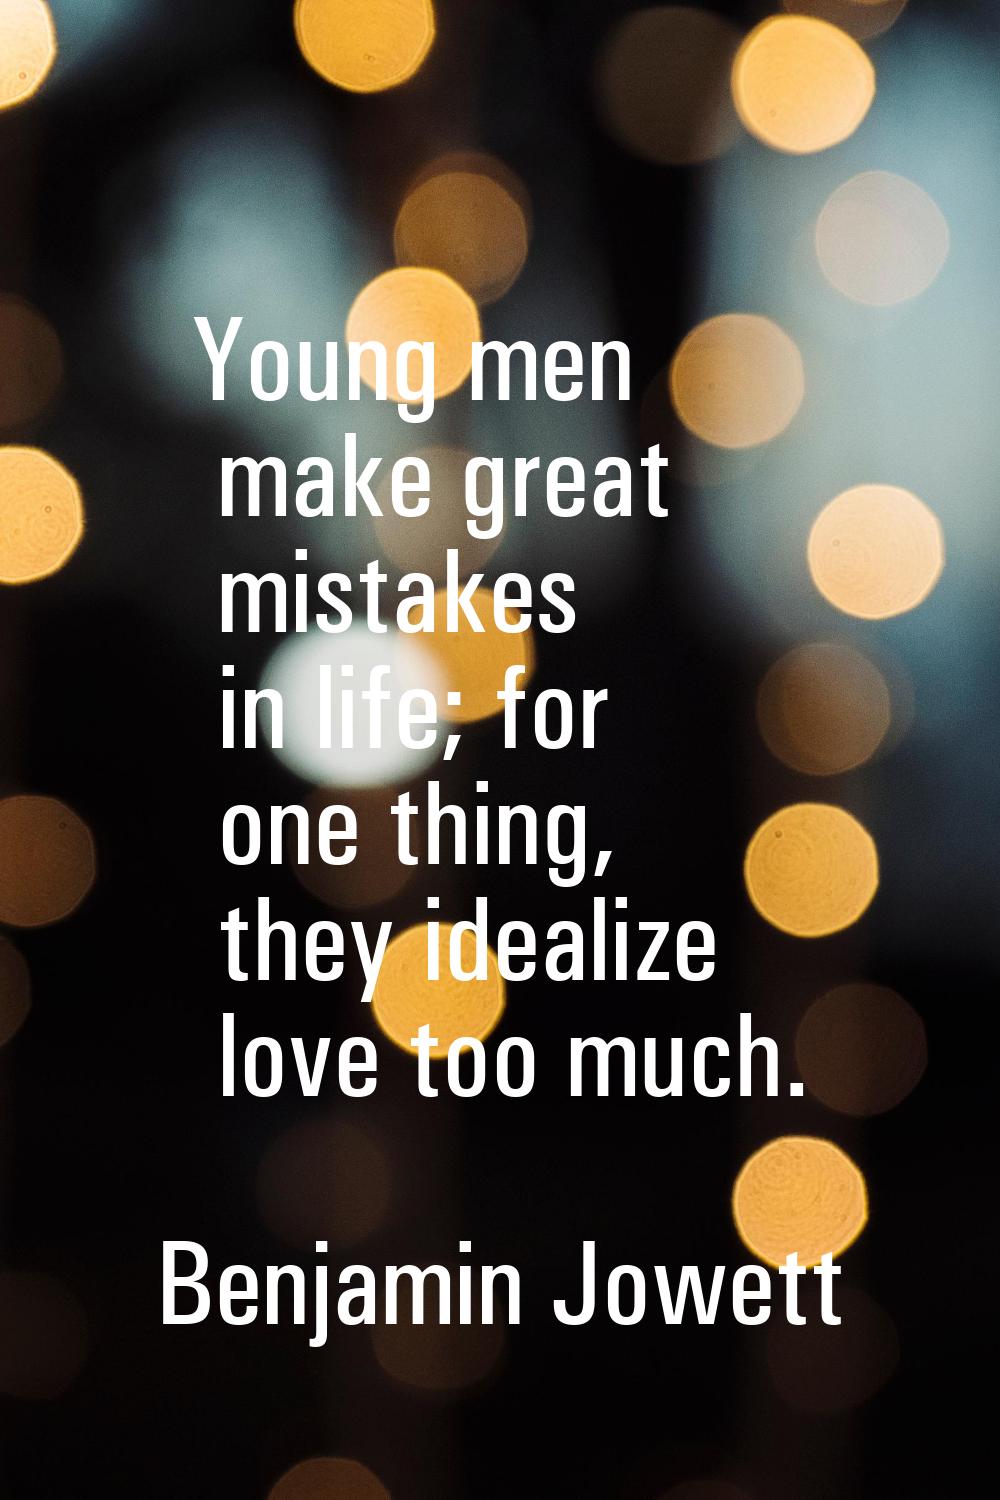 Young men make great mistakes in life; for one thing, they idealize love too much.